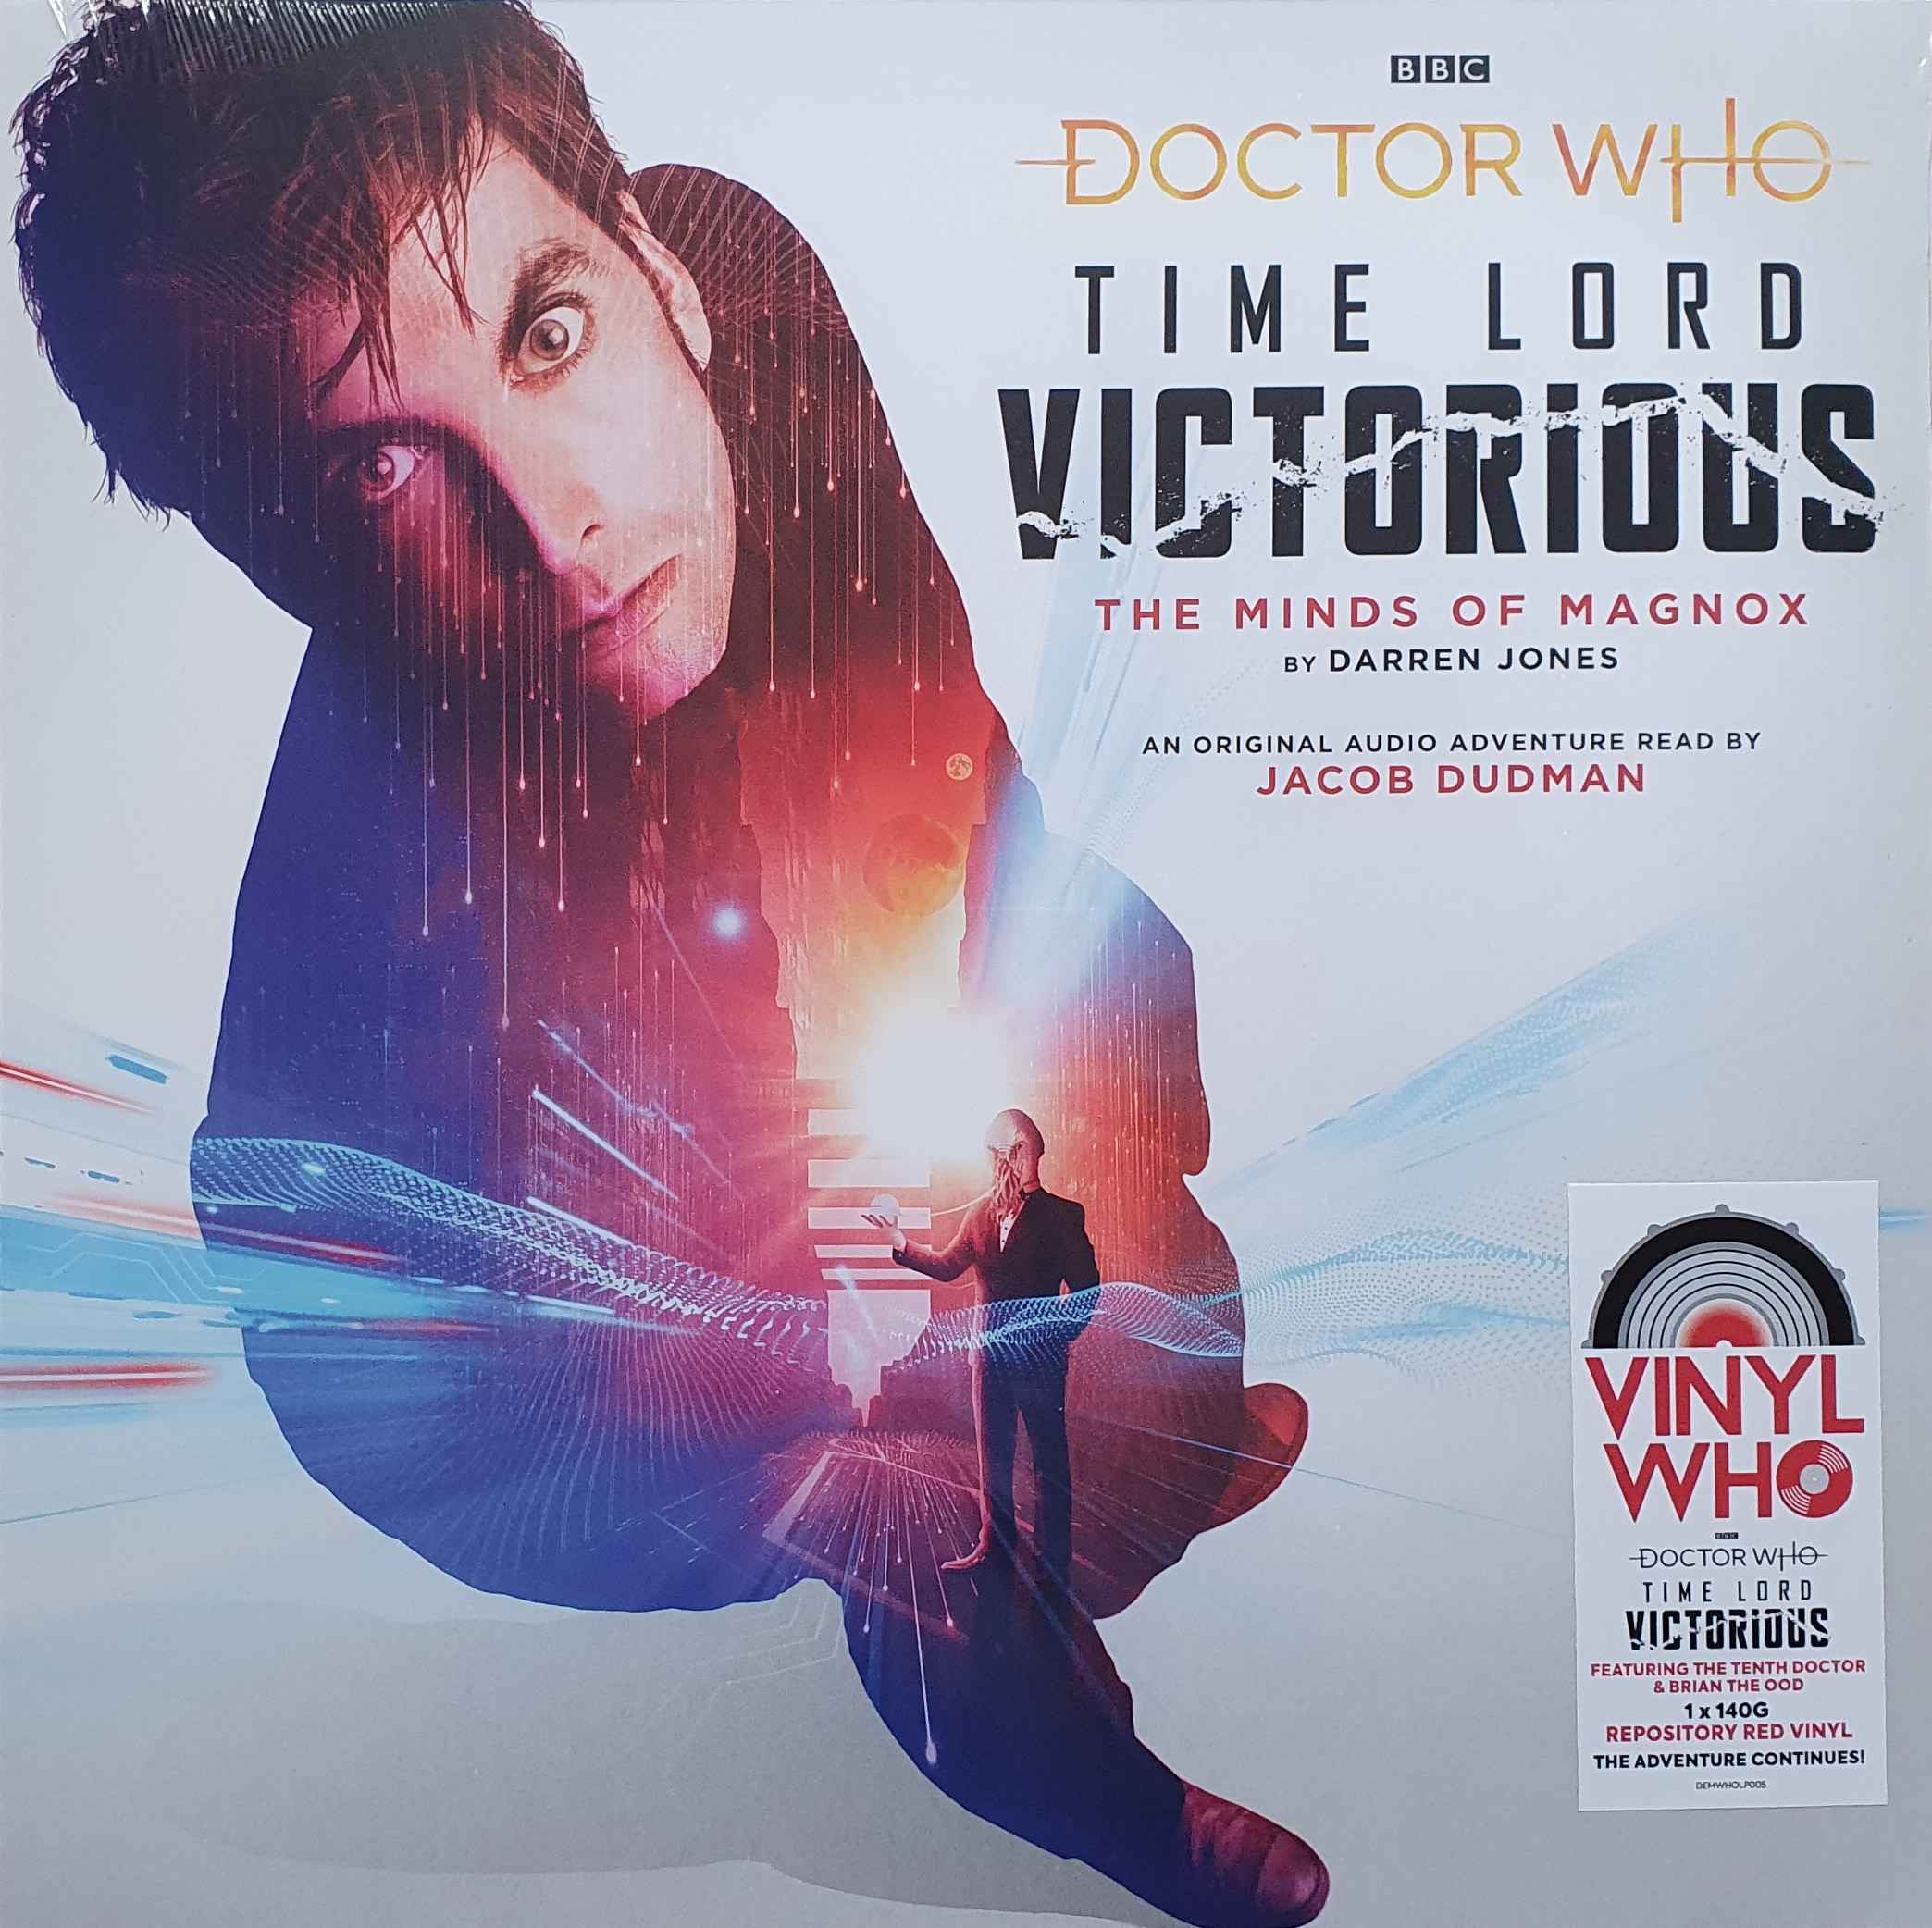 Picture of DEMWHOLP005 Doctor Who - Time Lord victorious - The minds of Magnox by artist Darren Jones / Jacob Dudman from the BBC records and Tapes library